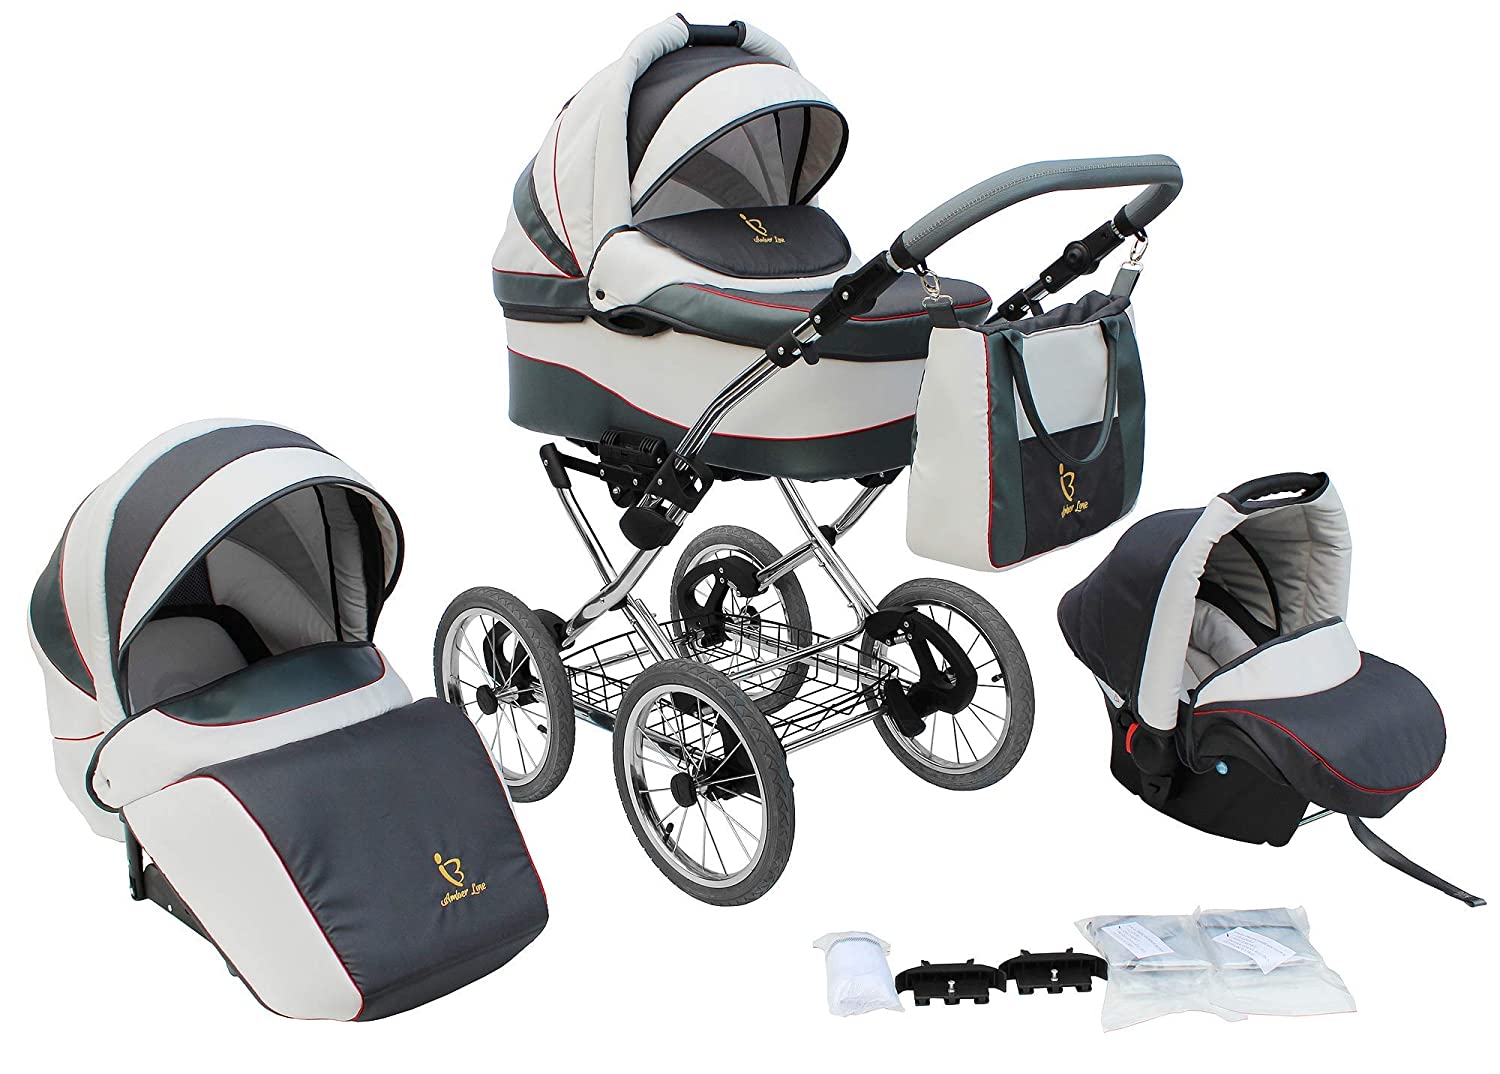 SKYLINE Classic Retro Style Combination Pram Buggy 3-in-1 Travel System Car Seat (Isofix) (Grey/14 Inch Air Tyres)